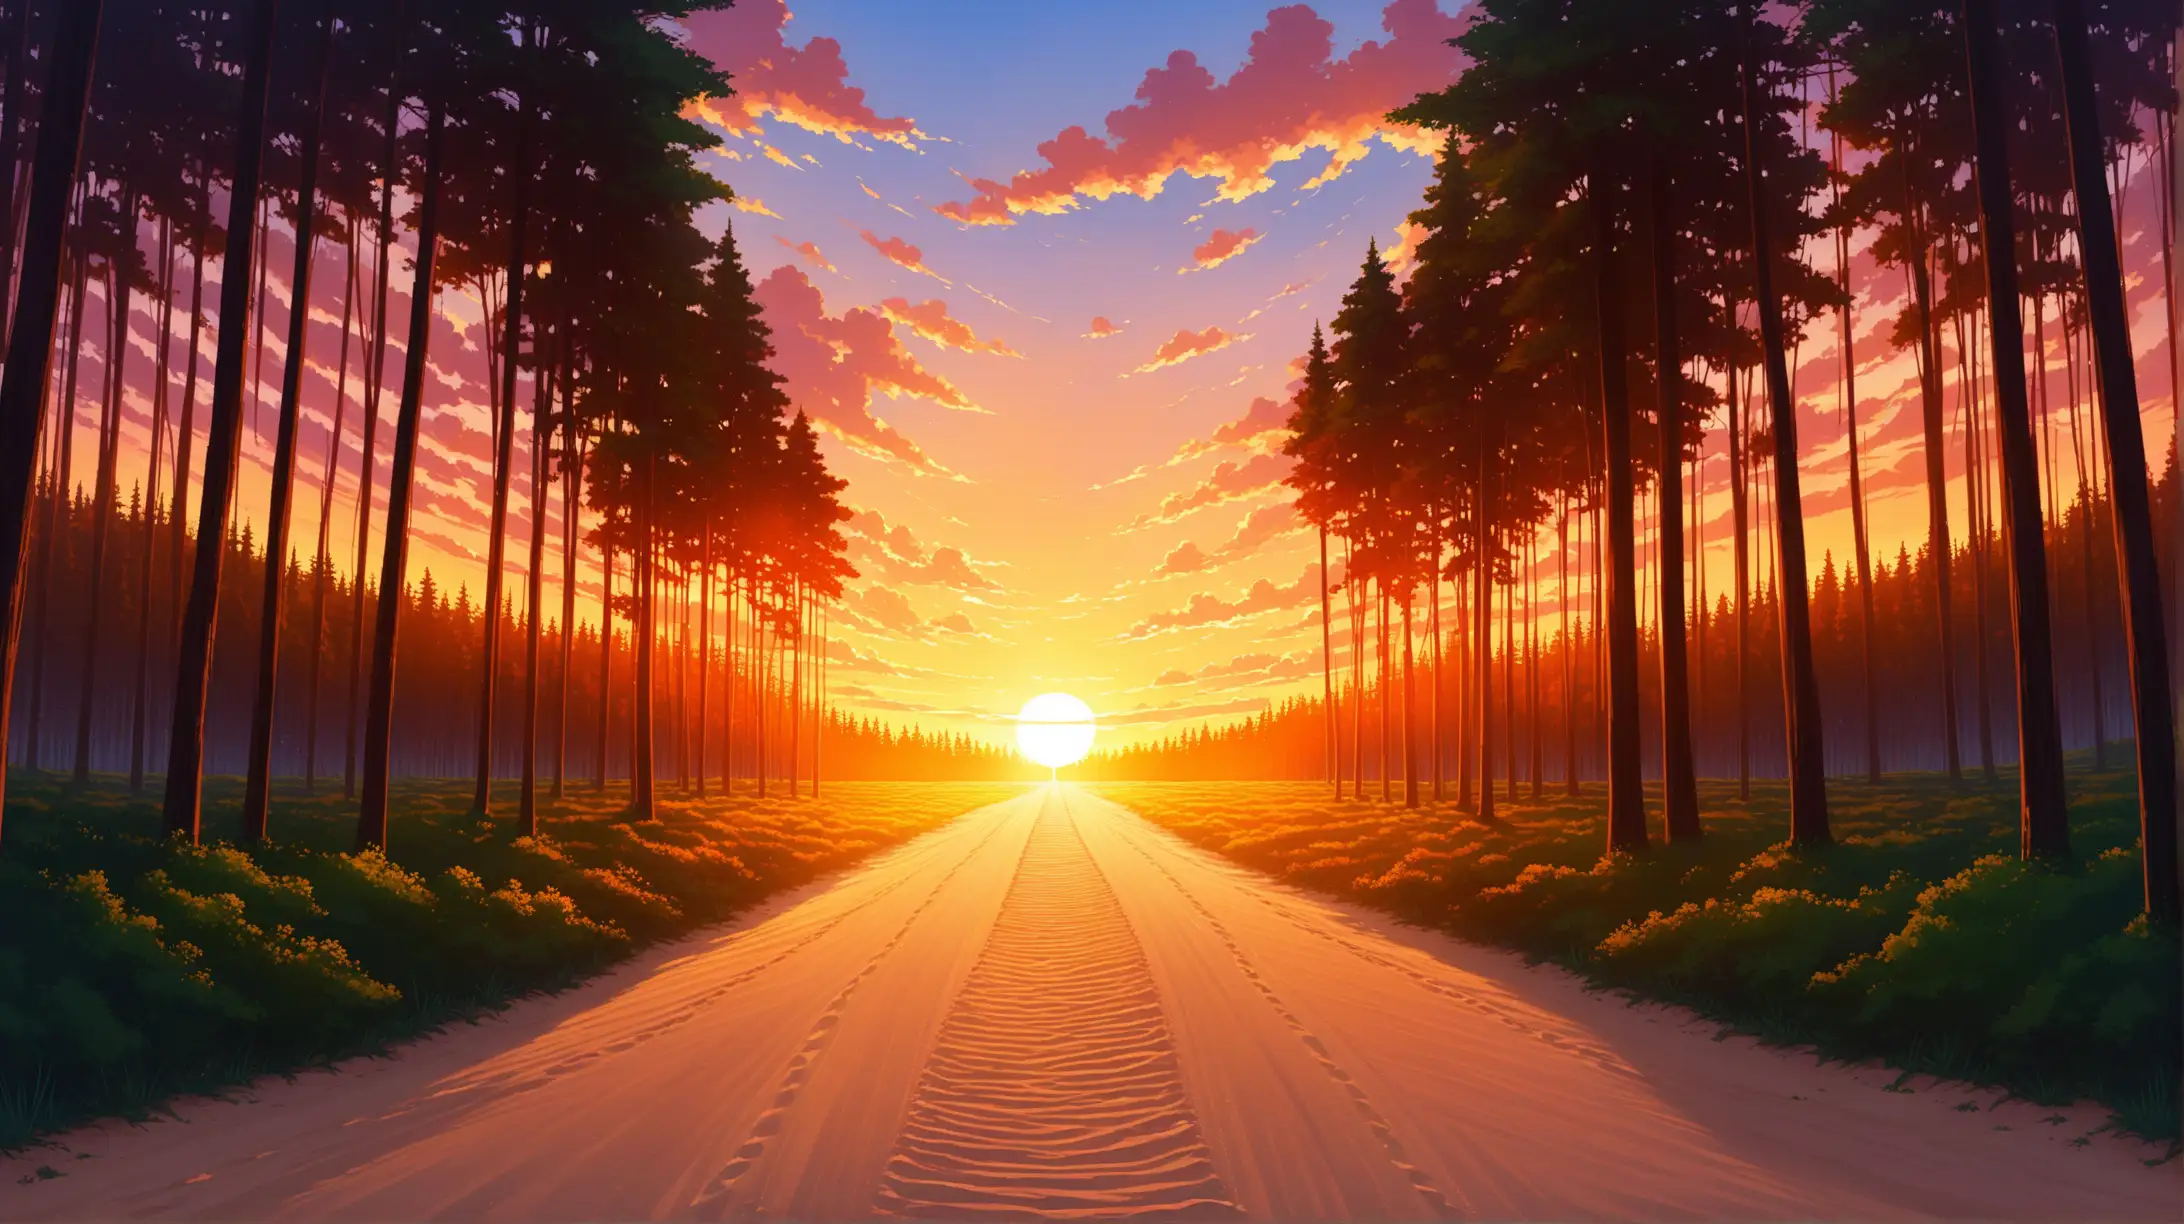 a sand road leads to sunset in the forest, madhouse studio